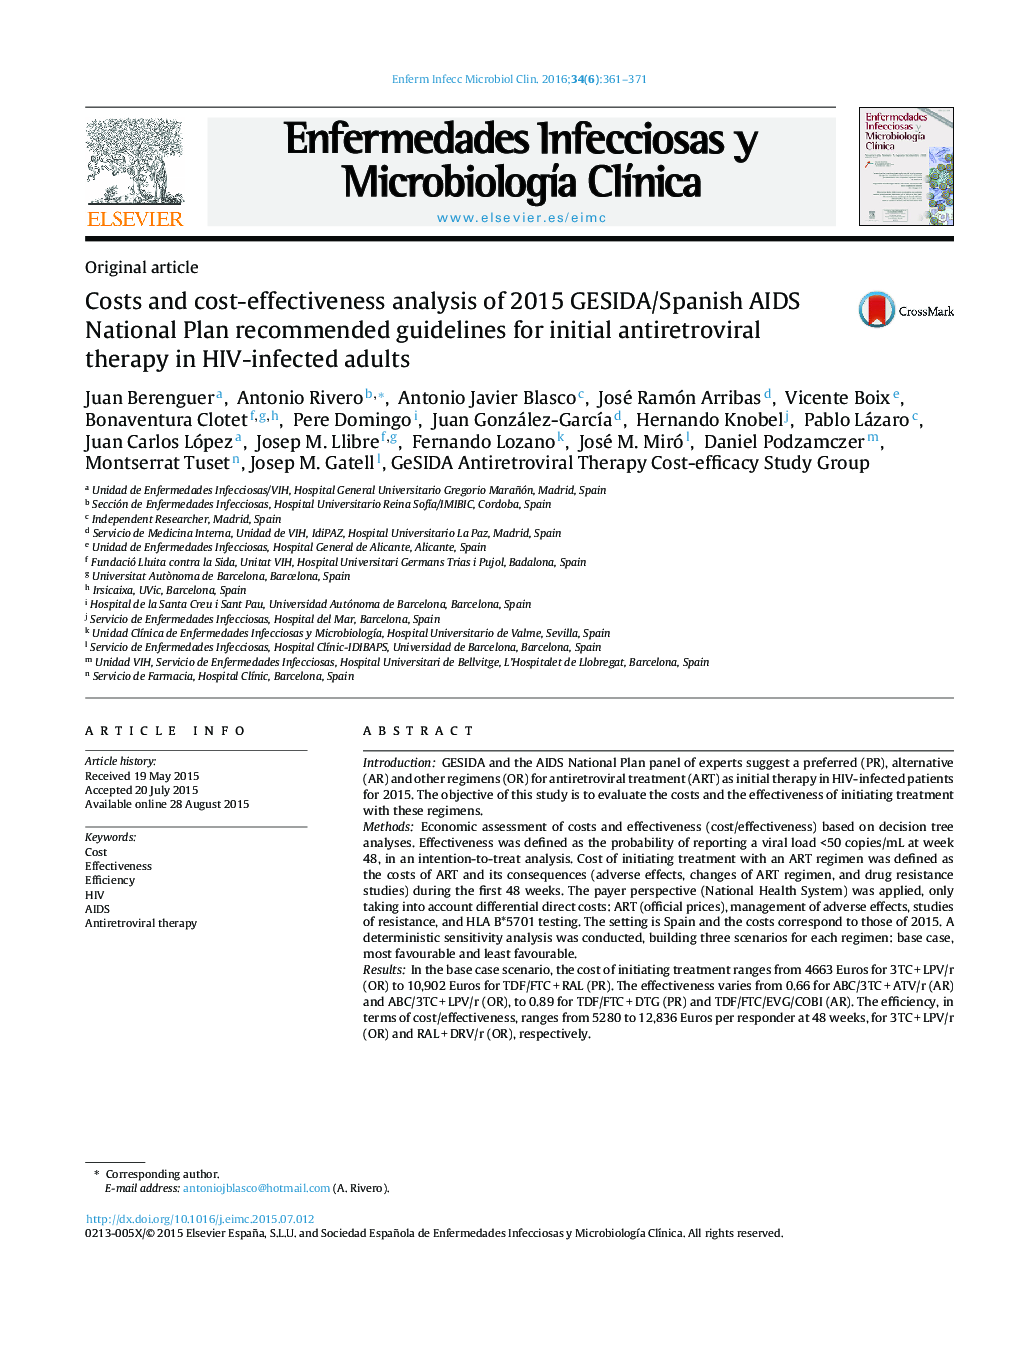 Costs and cost-effectiveness analysis of 2015 GESIDA/Spanish AIDS National Plan recommended guidelines for initial antiretroviral therapy in HIV-infected adults